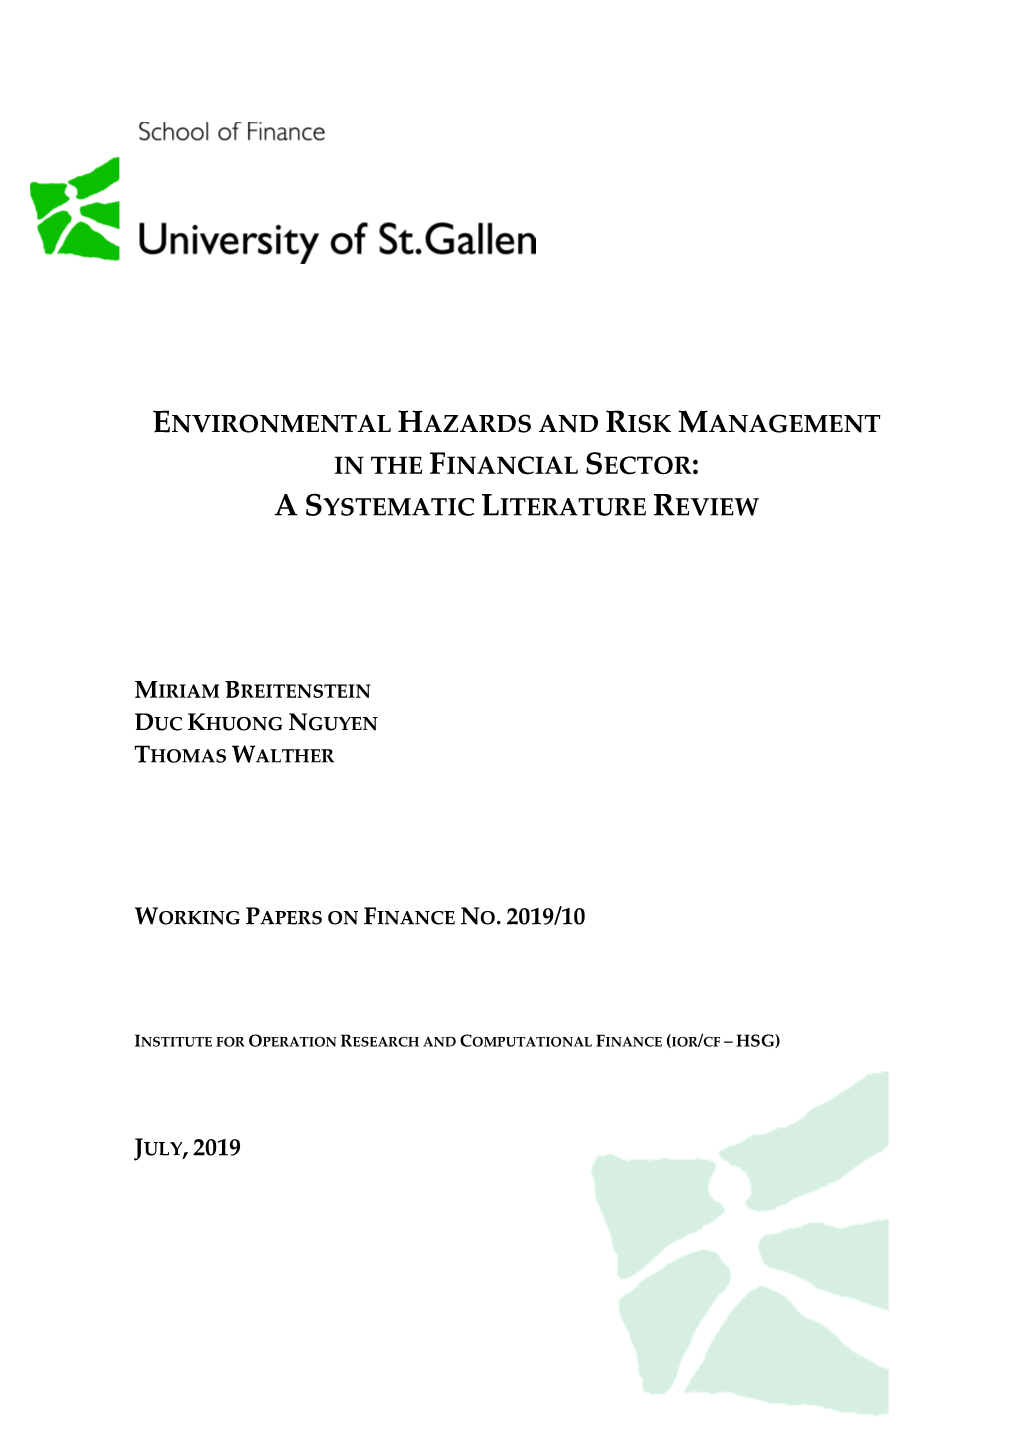 Environmental Hazards and Risk Management in the Financial Sector: a Systematic Literature Review